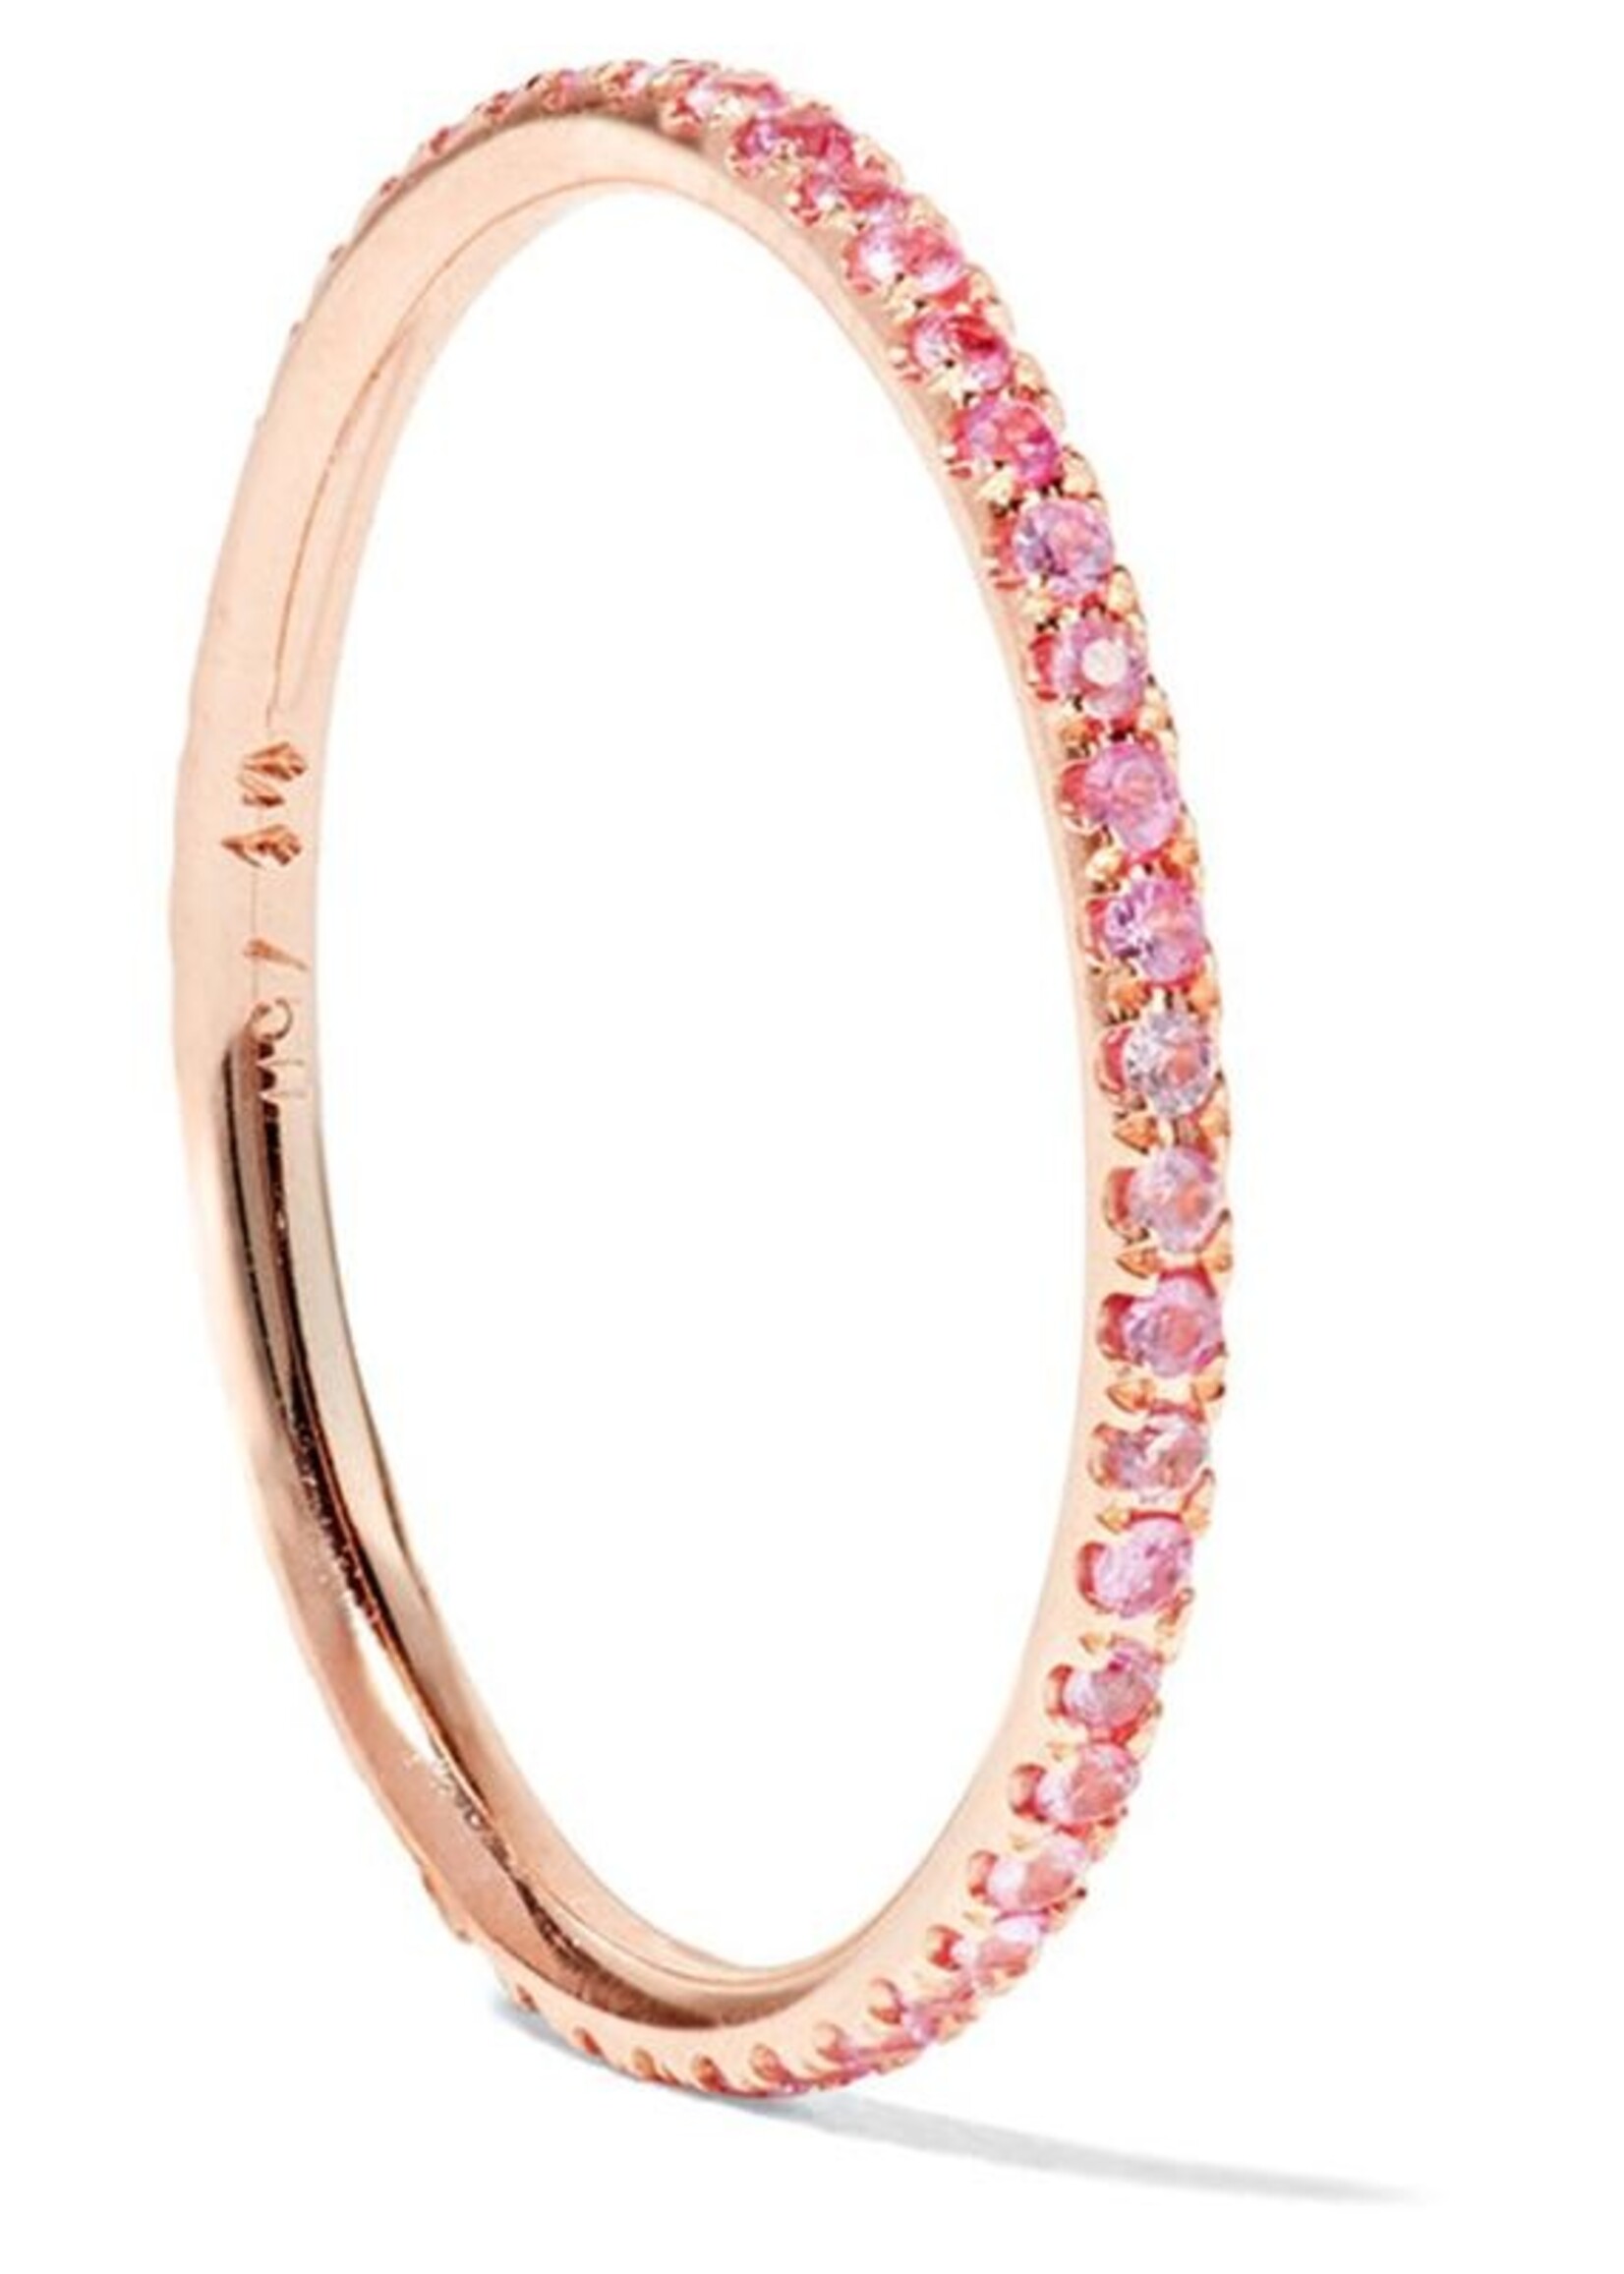 ILEANA MAKRI THREAD BAND P-PS 18K PINK GOLD RING WITH PINK SAPPHIRES